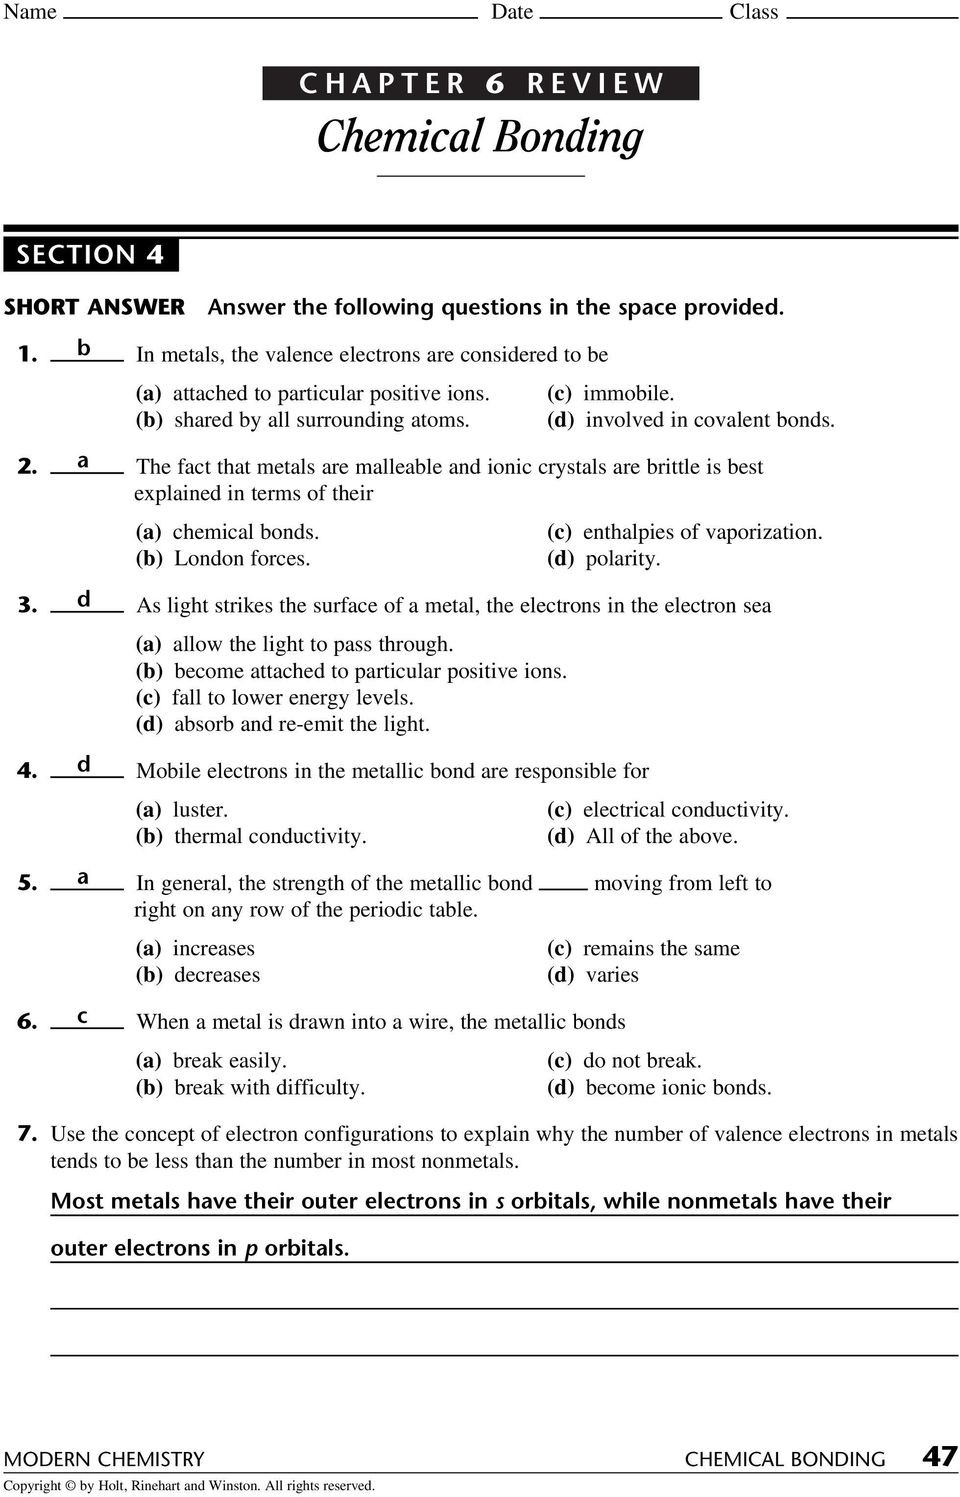 Ionic Bonding Worksheet Key Chapter 6 Review Chemical Bonding Answer the Following